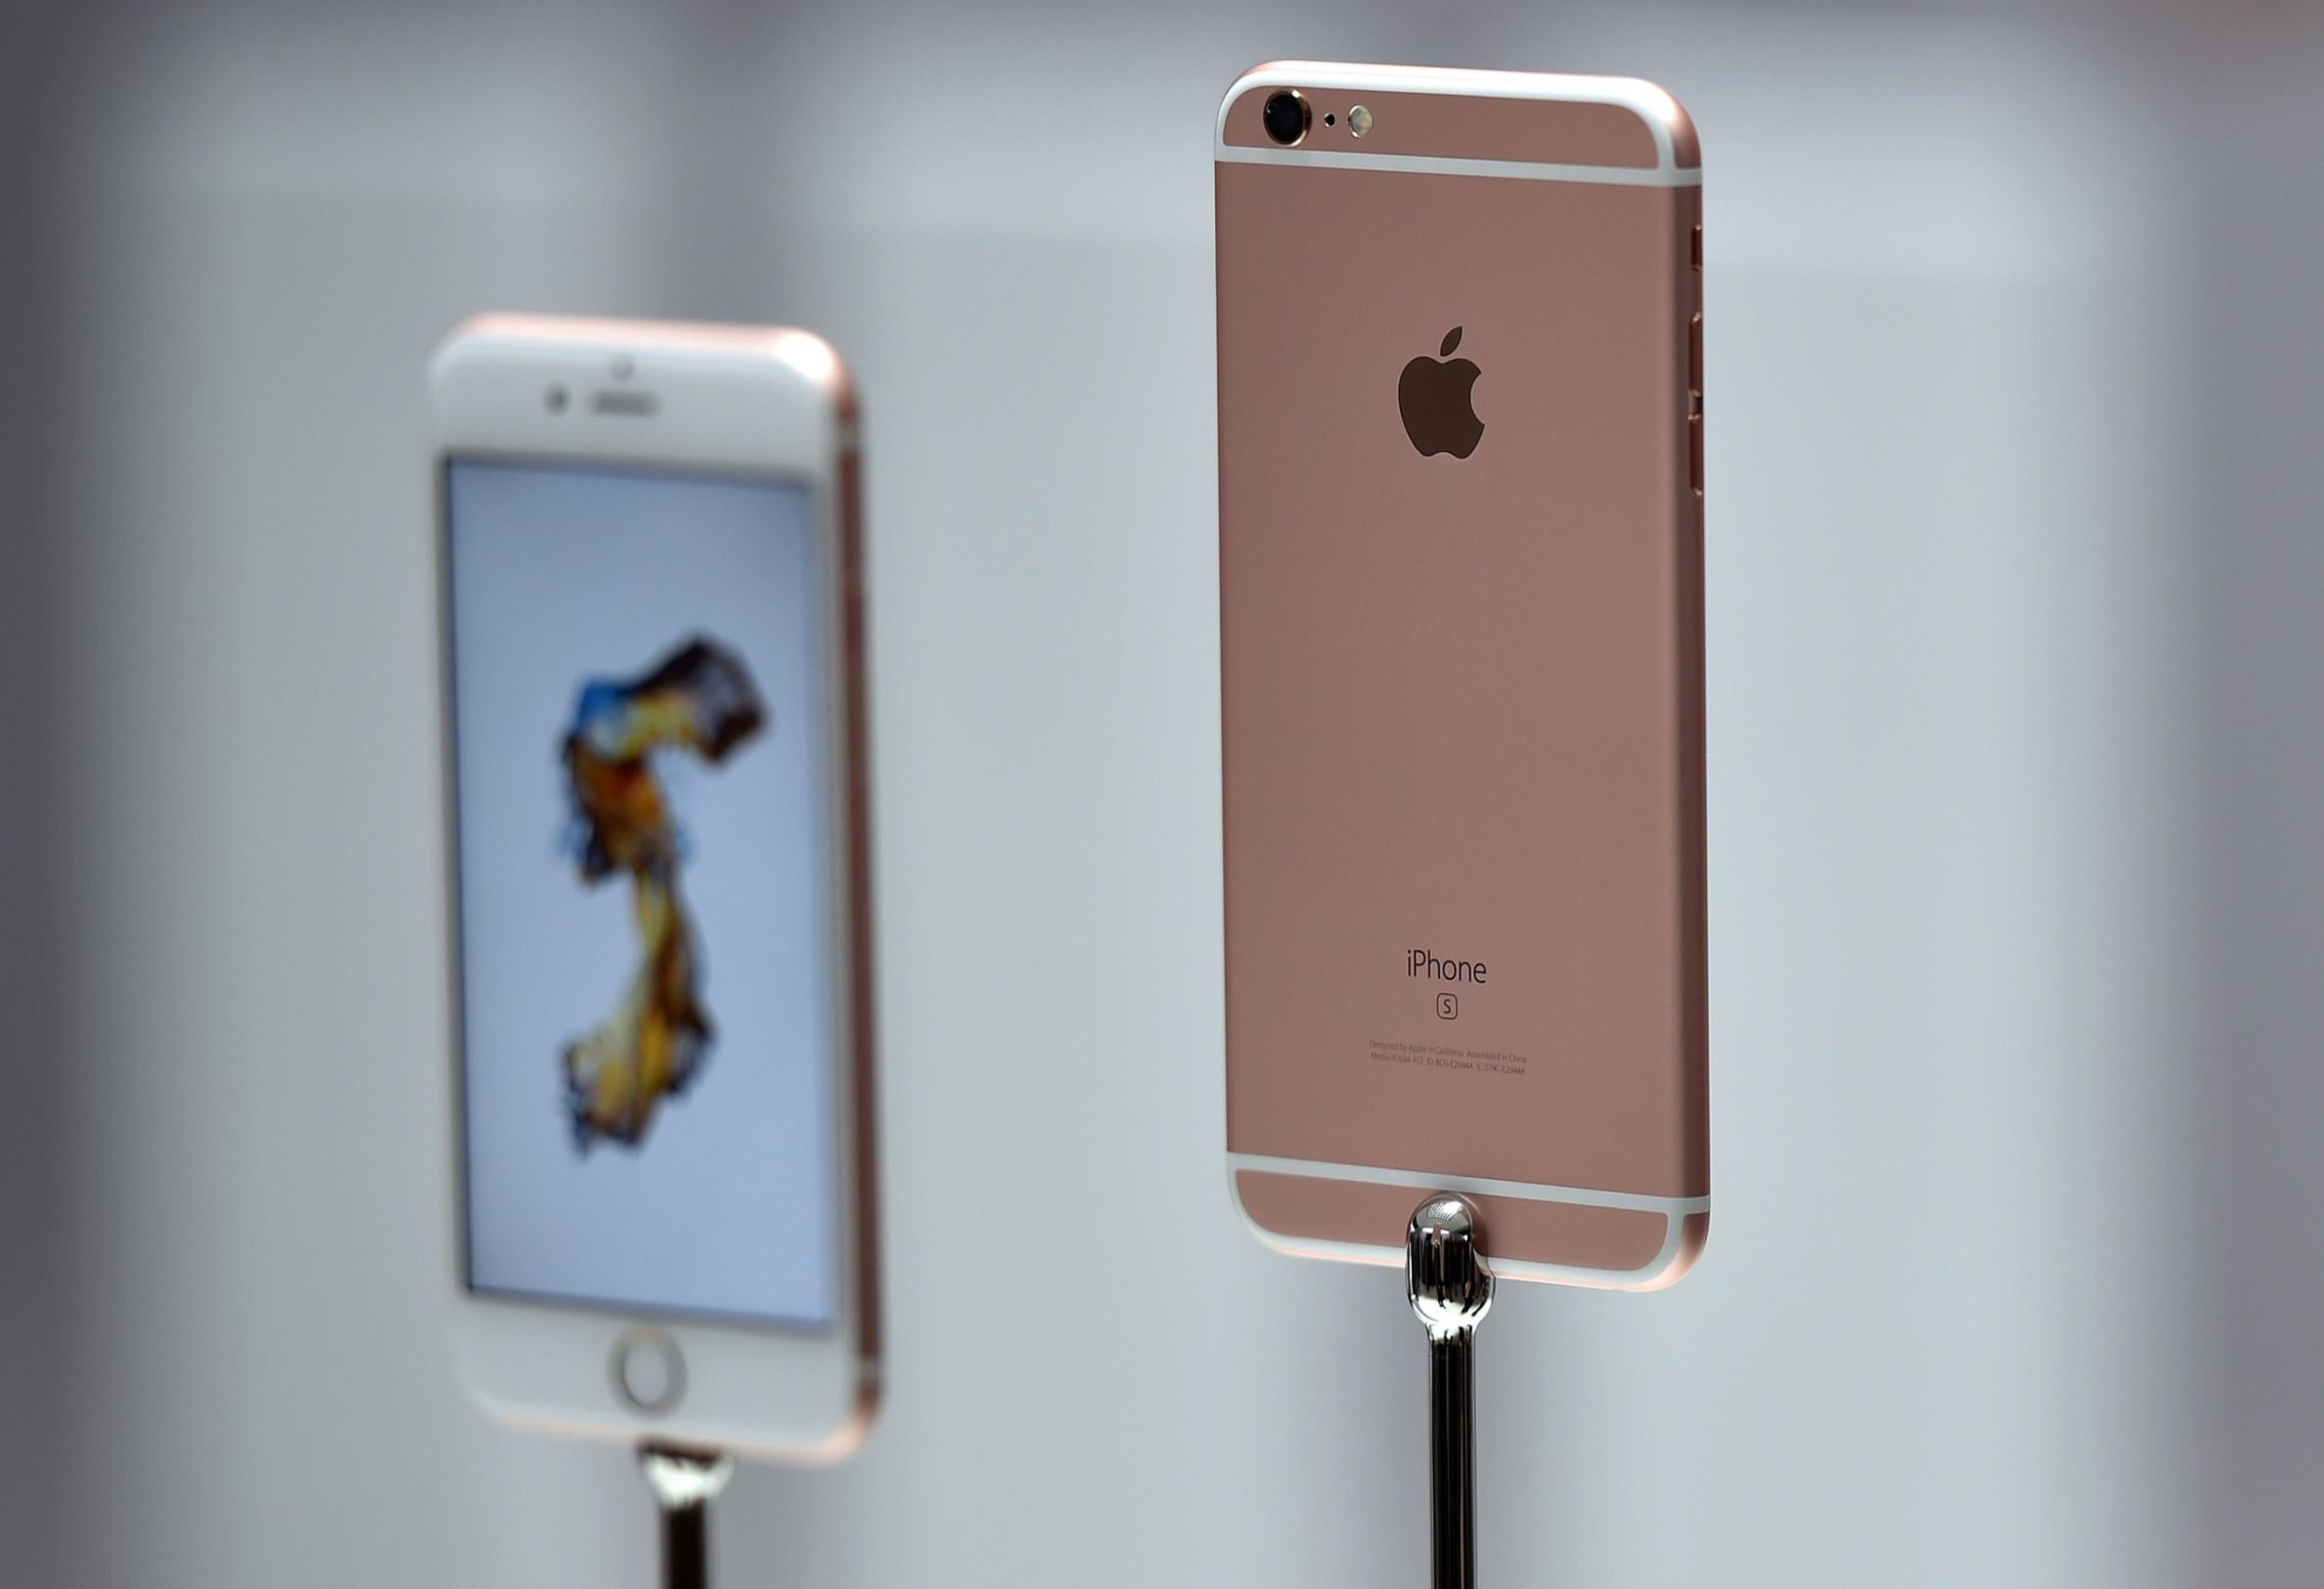 Could the iPhone 6S processor have such a big impact on battery life?